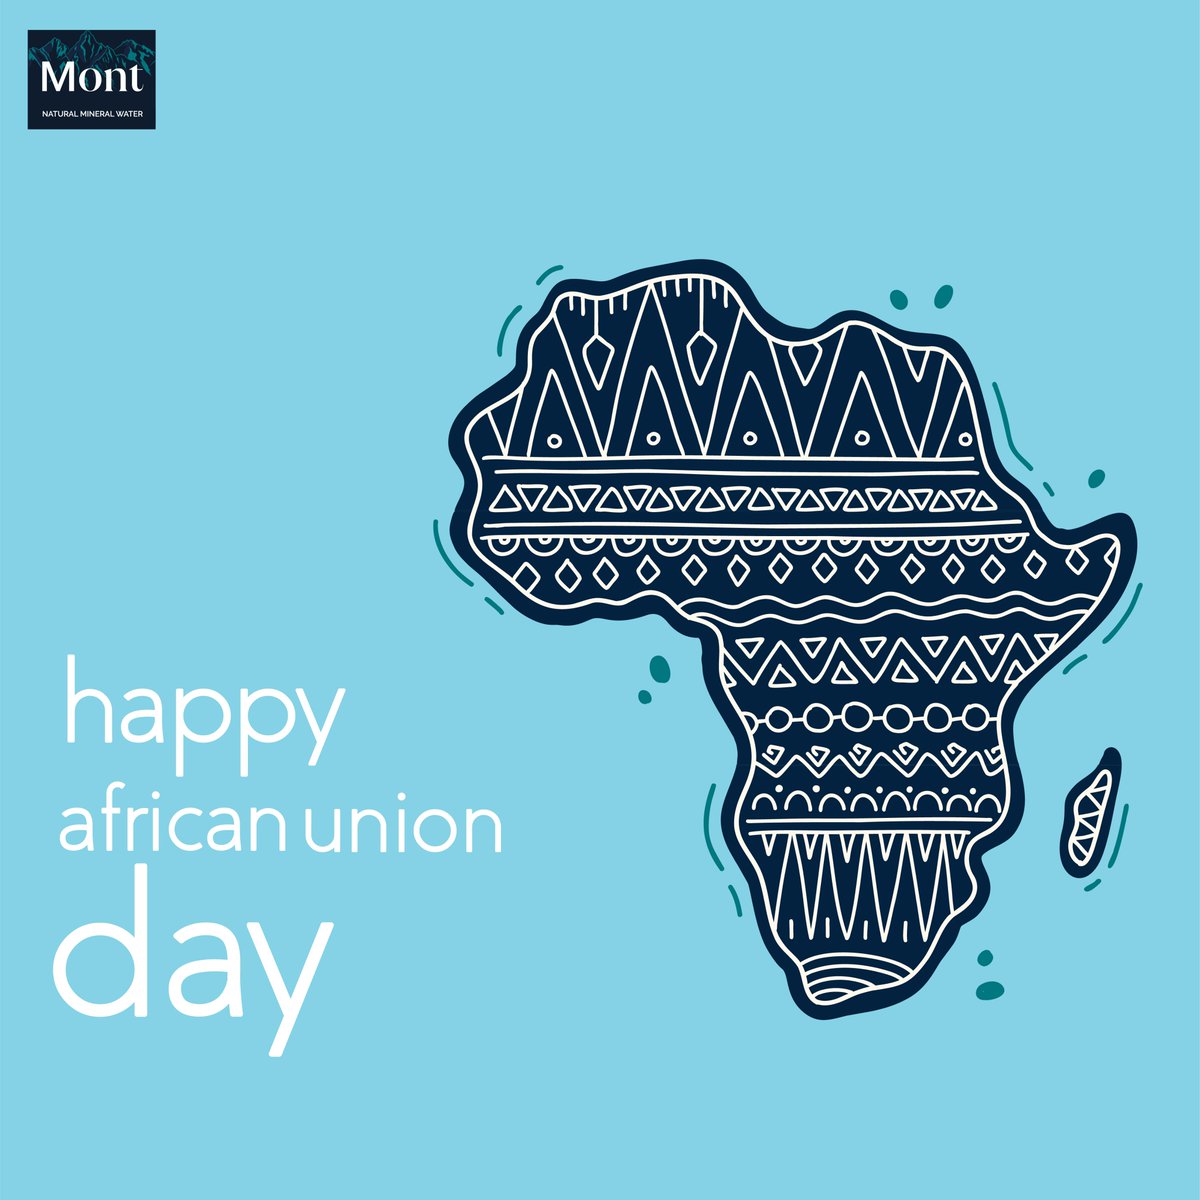 Happy African Union Day to our Great Motherland! Drink Mont to commemorate!